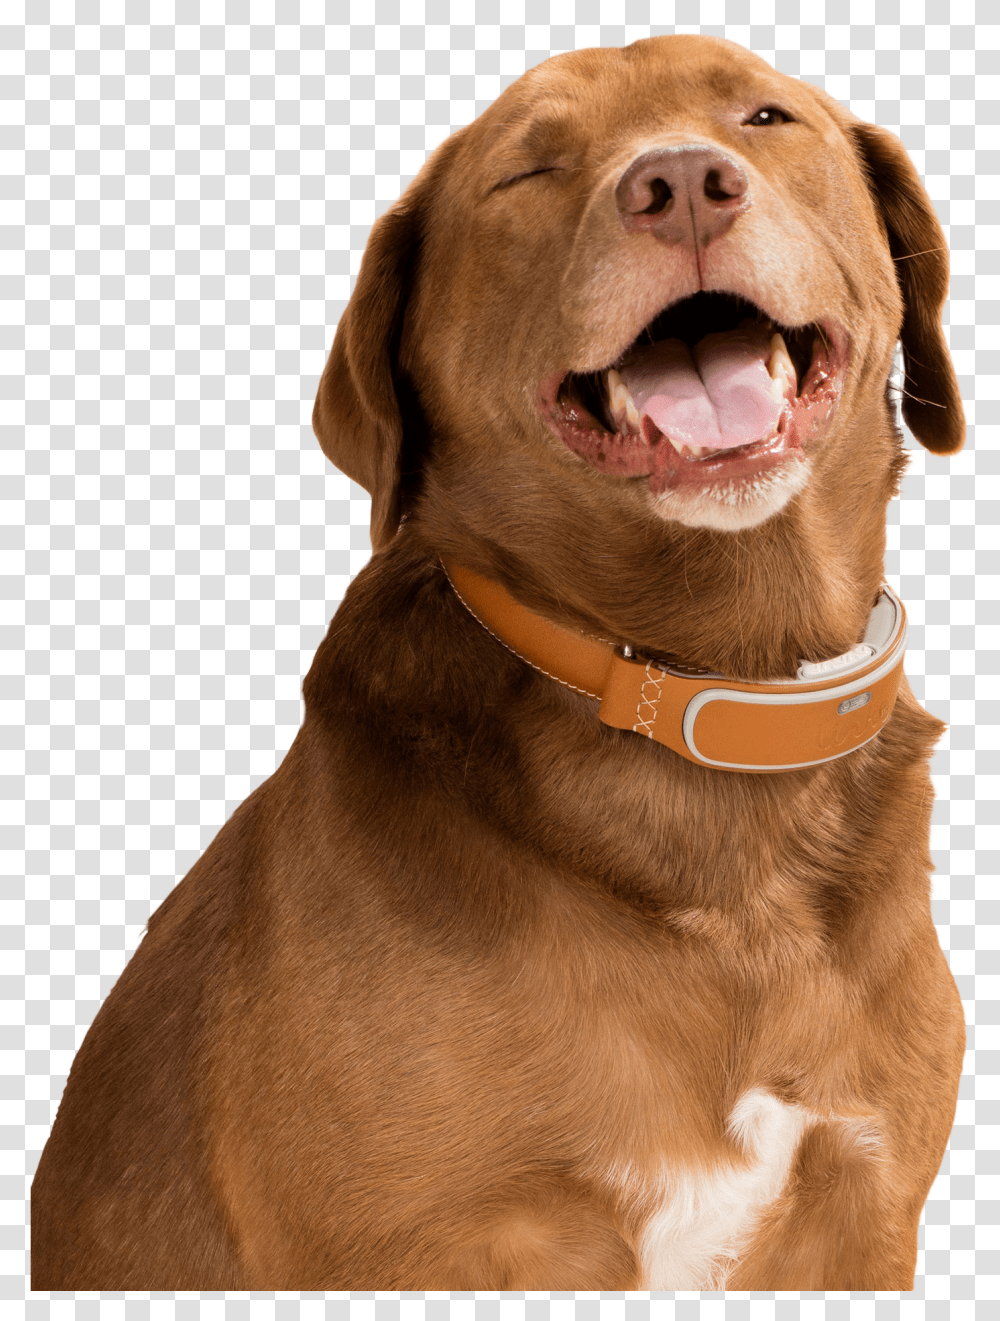 Happy April Fools Day Dog With Smart Collar Dog With Smart Collar, Pet, Canine, Animal, Mammal Transparent Png